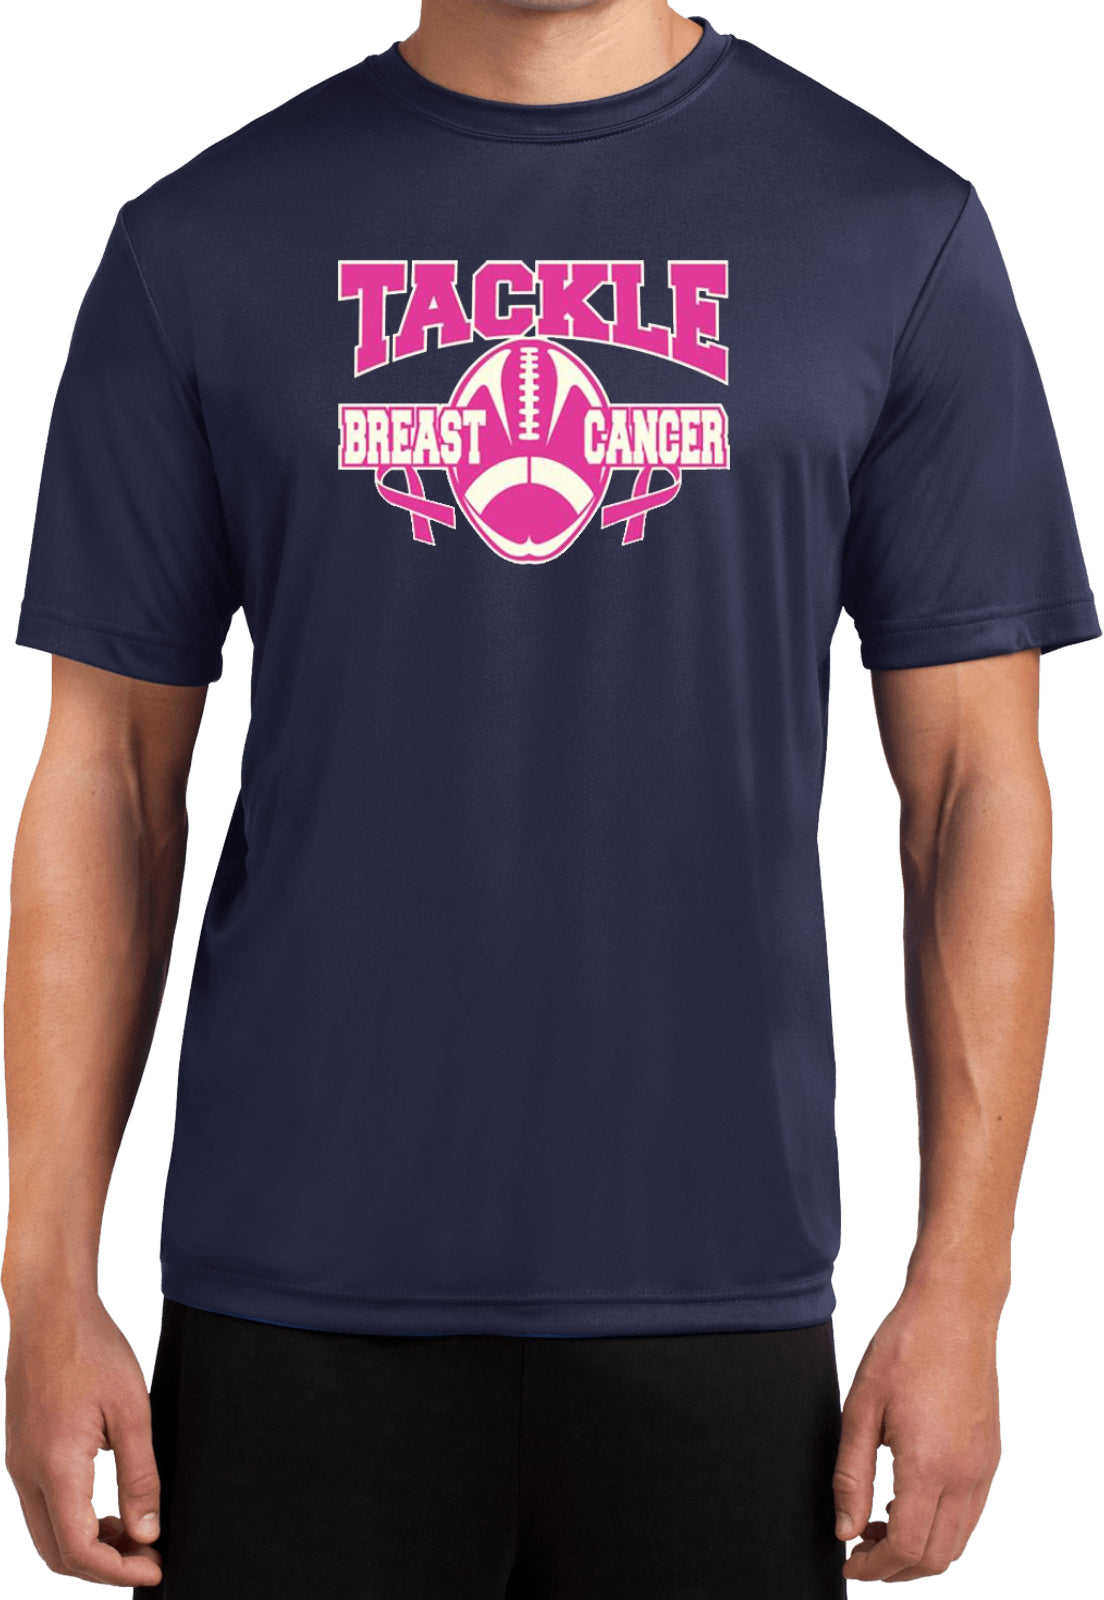 Breast Cancer T-shirt Tackle Cancer Moisture Wicking Tee